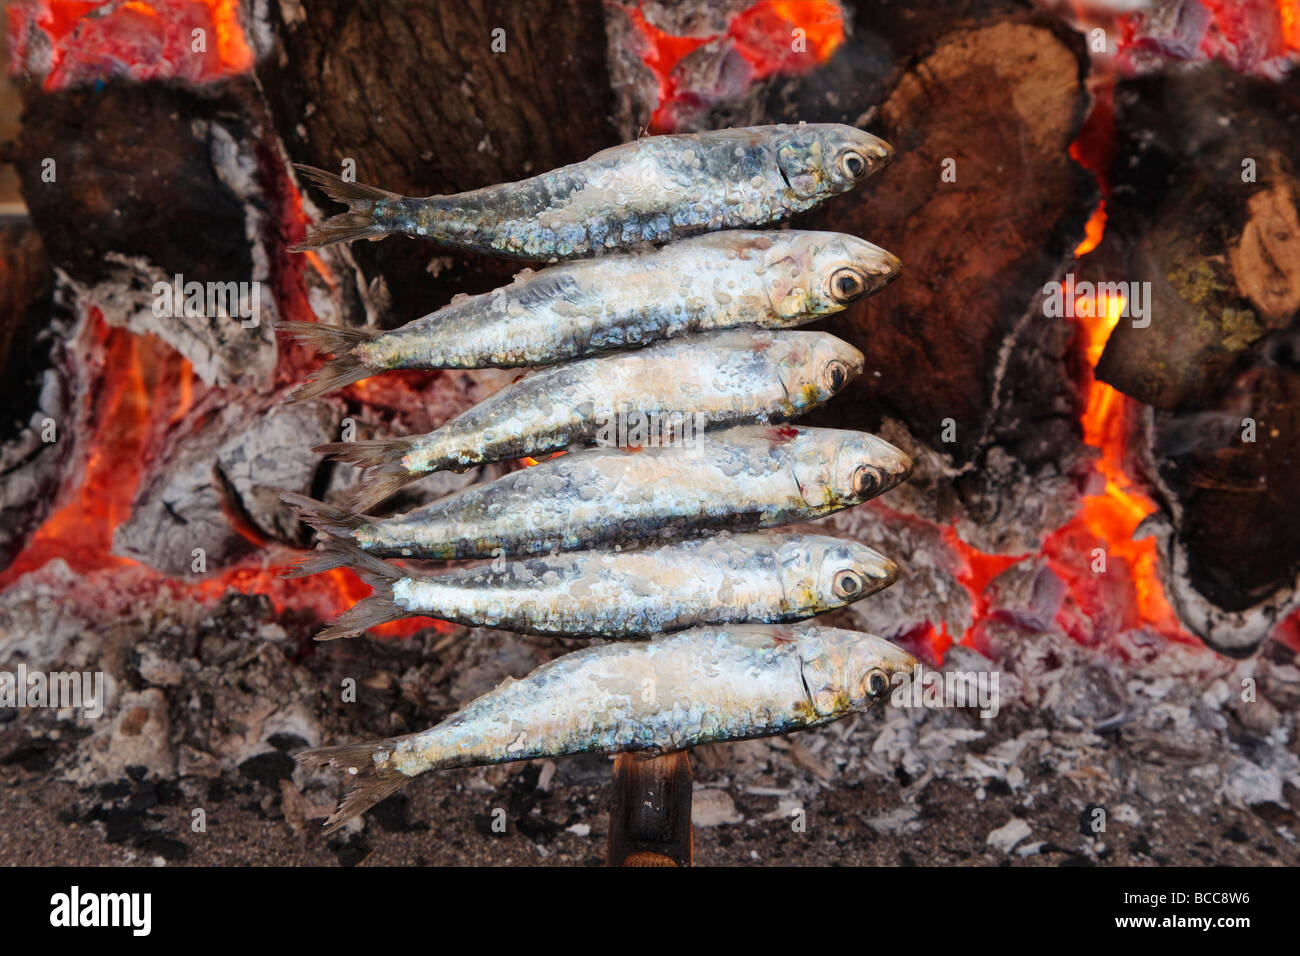 Spain Skewers or espetos of sardines barbecueing on open fire Stock Photo